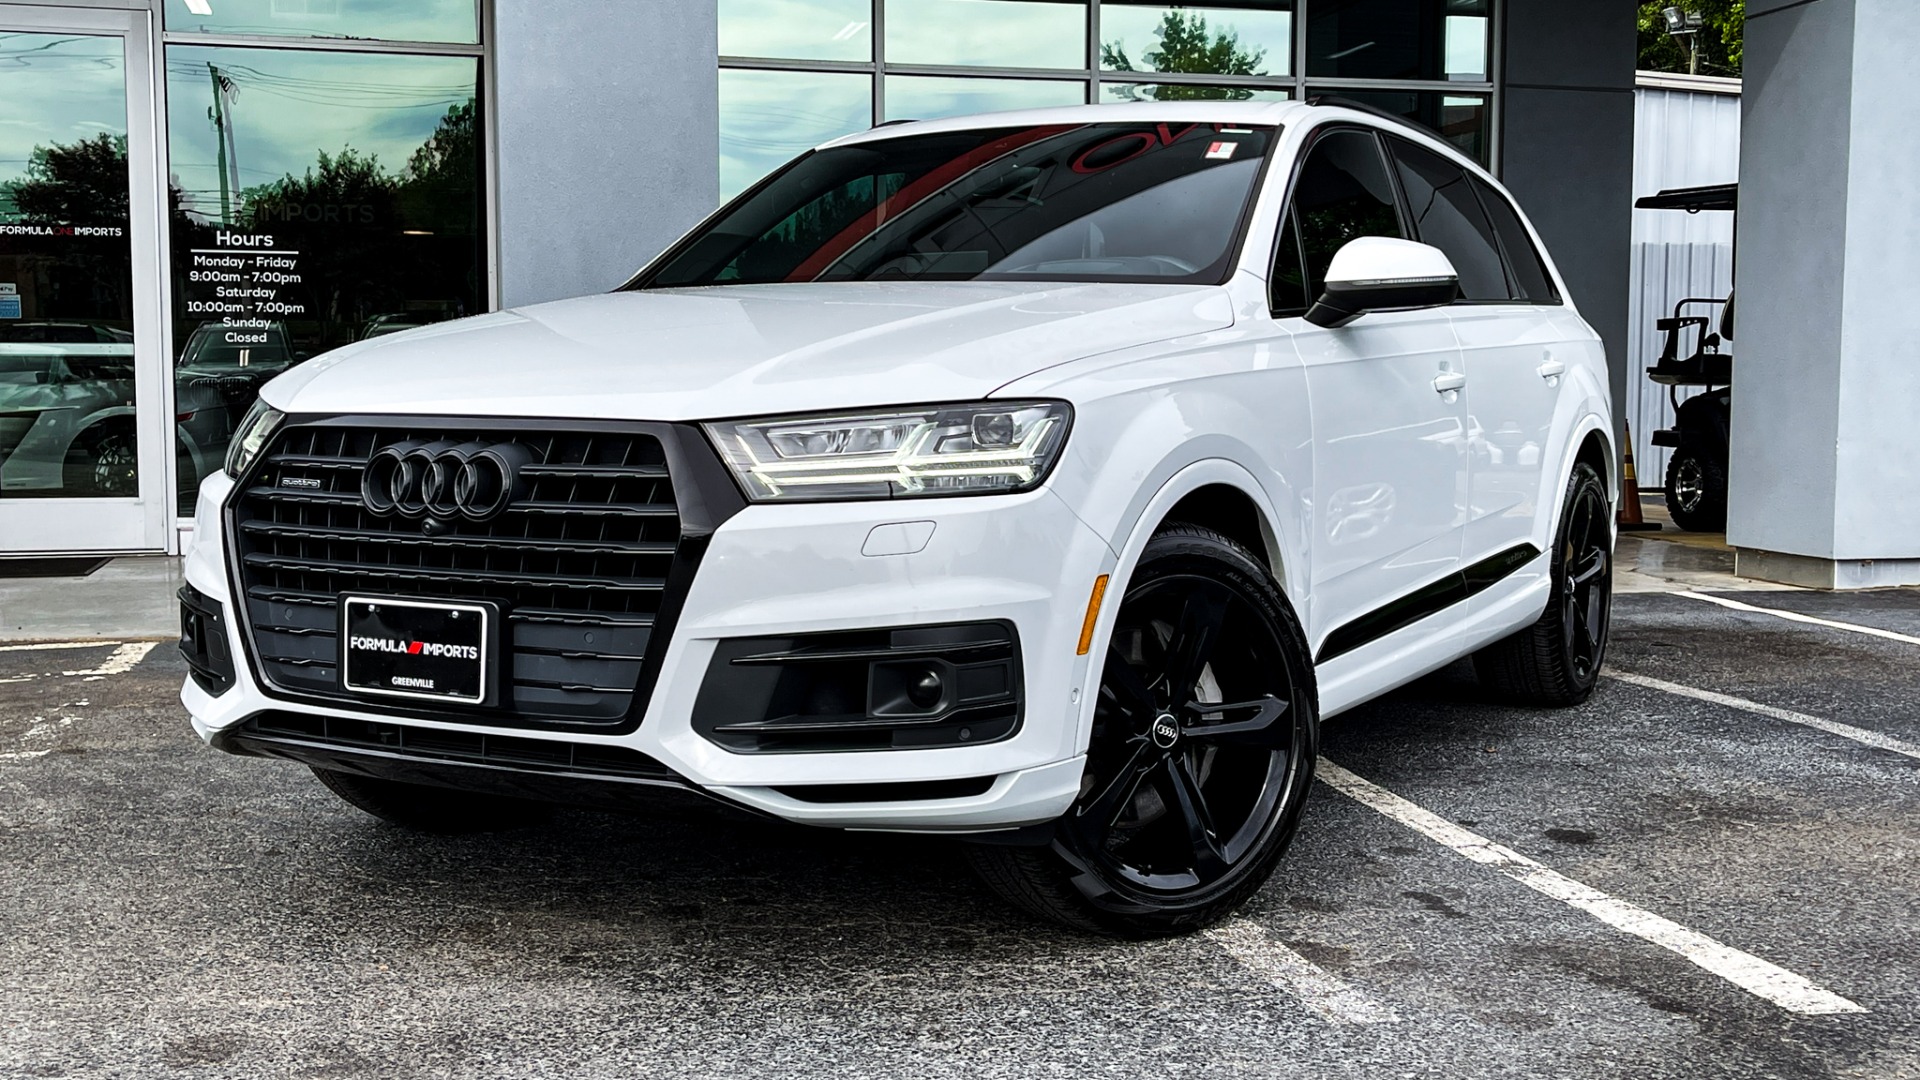 Used 2019 Audi Q7 PRESTIGE / NAV / SUNROOF / LANE ASST / TOWING / 21-IN WHLS / REA for sale $50,995 at Formula Imports in Charlotte NC 28227 1